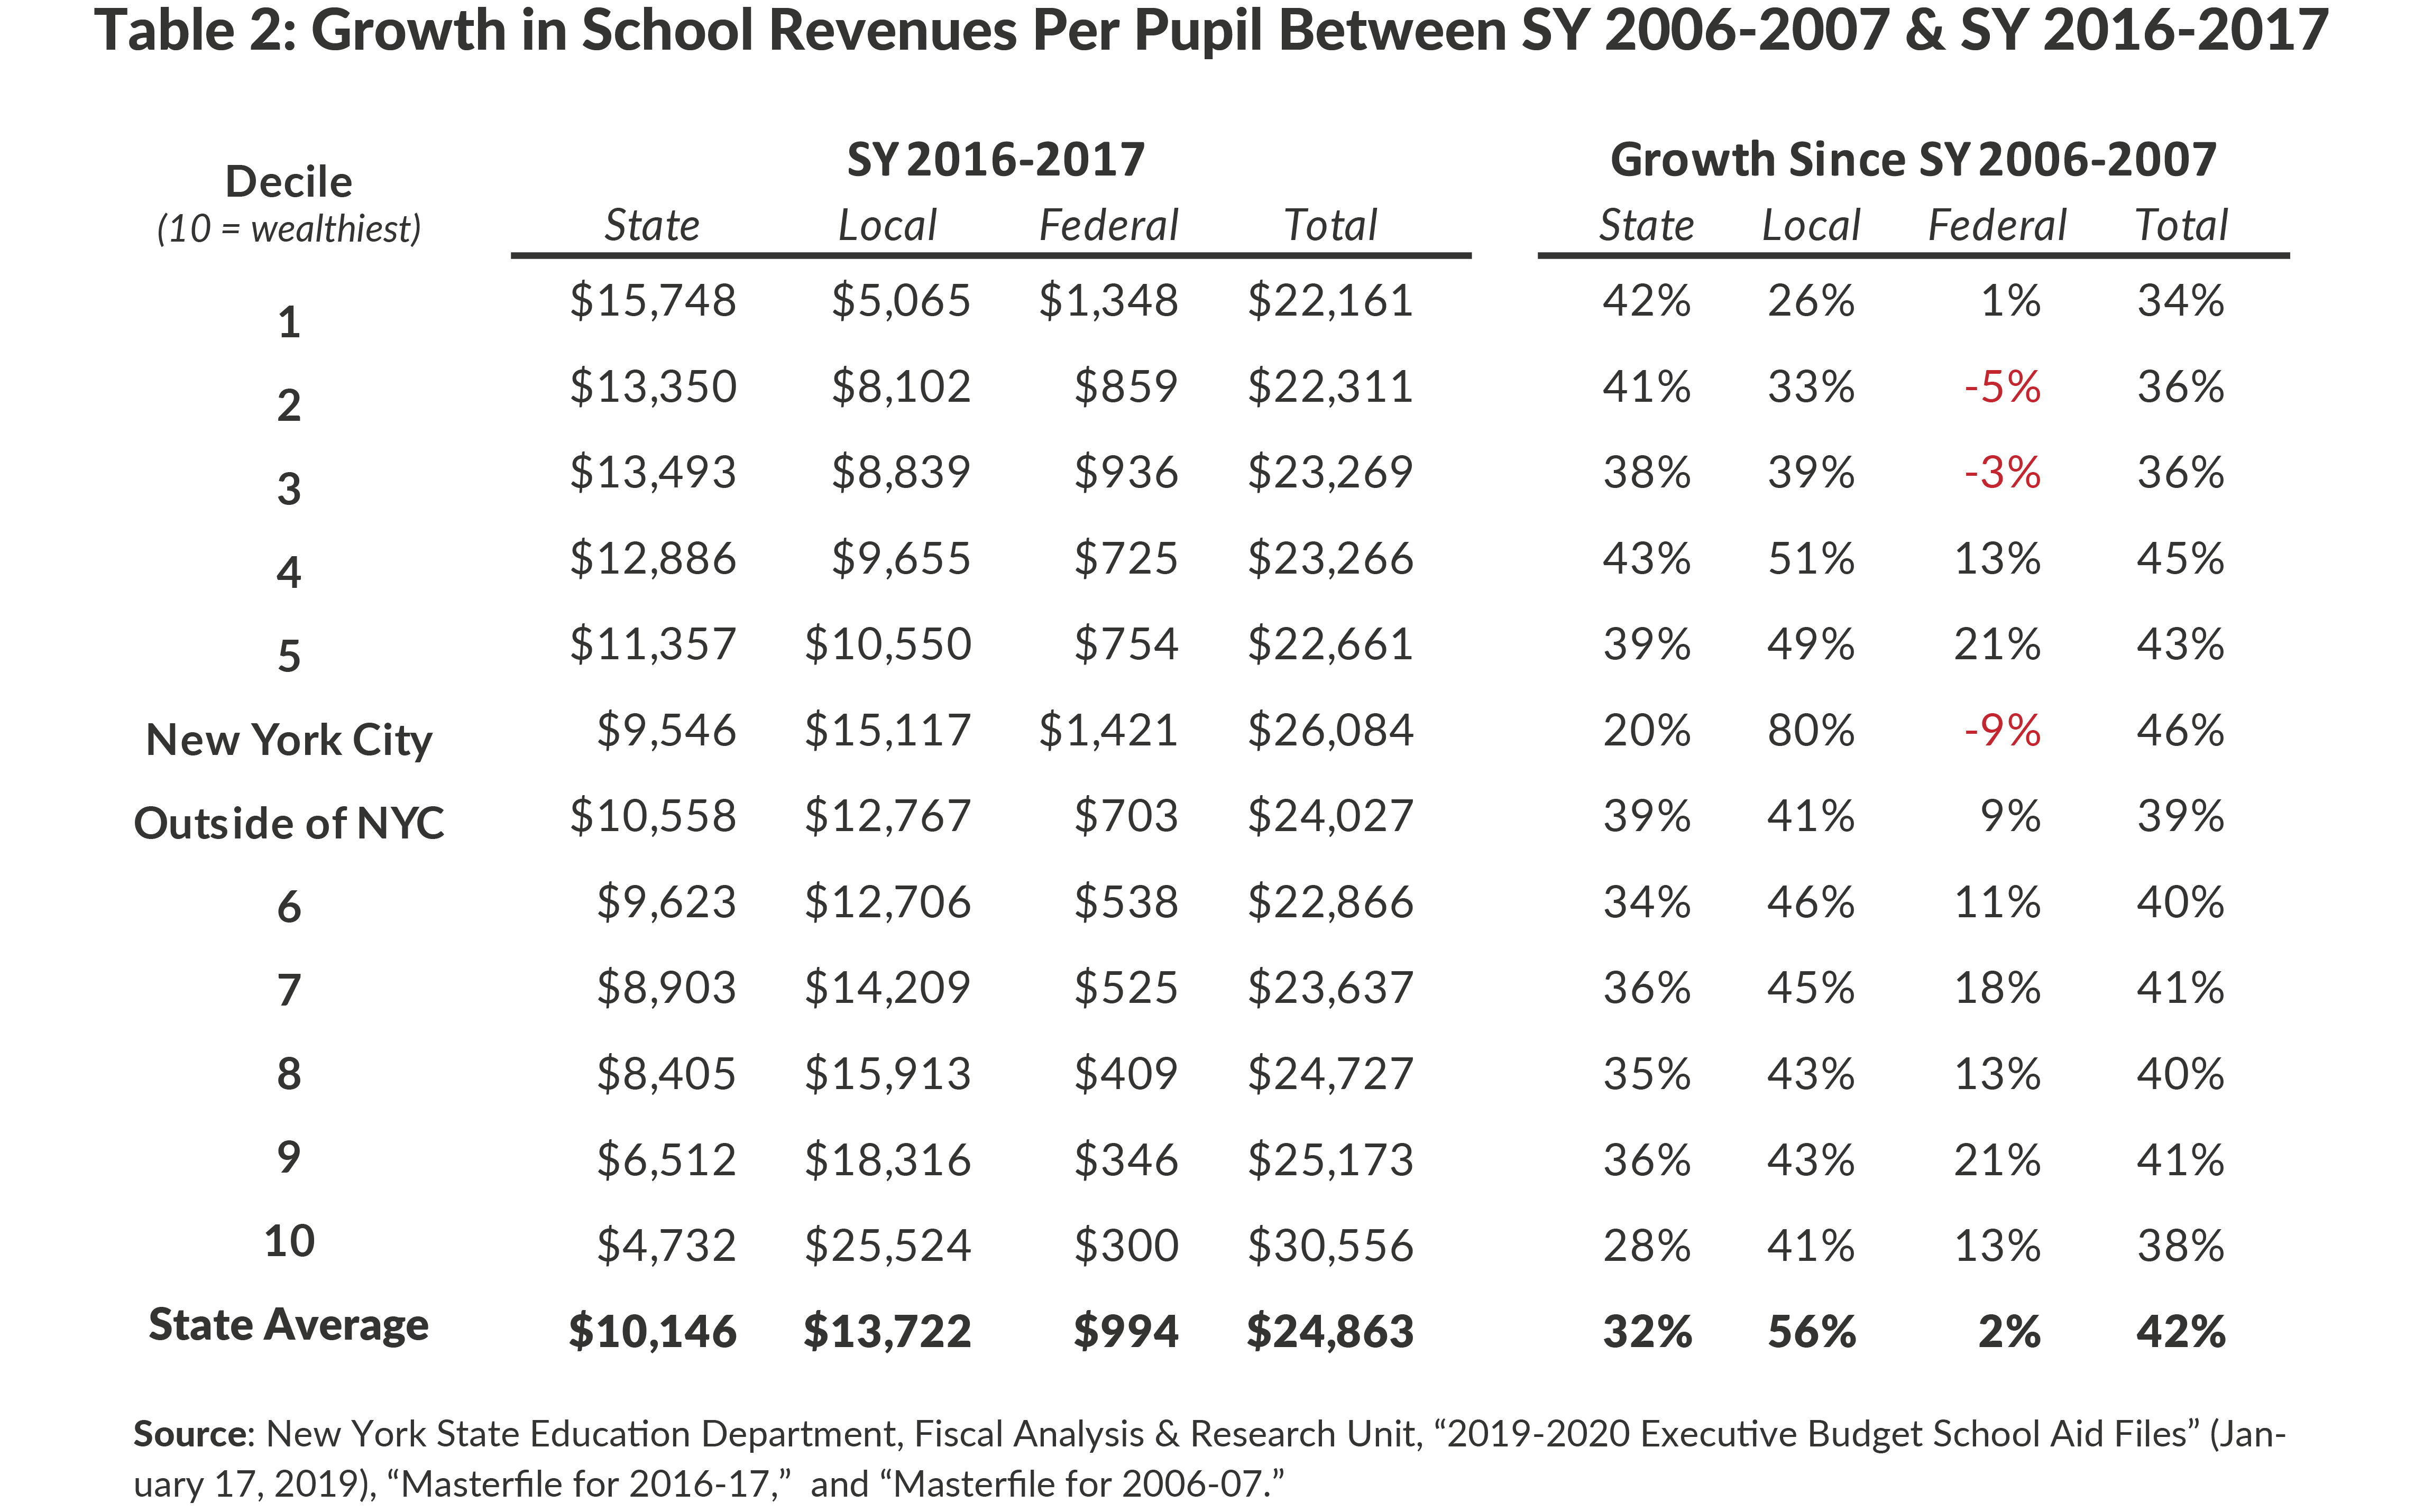 Table 2: Growth in School Revenues Per Pupil Between SY 2006-2007 & SY 2016-2017